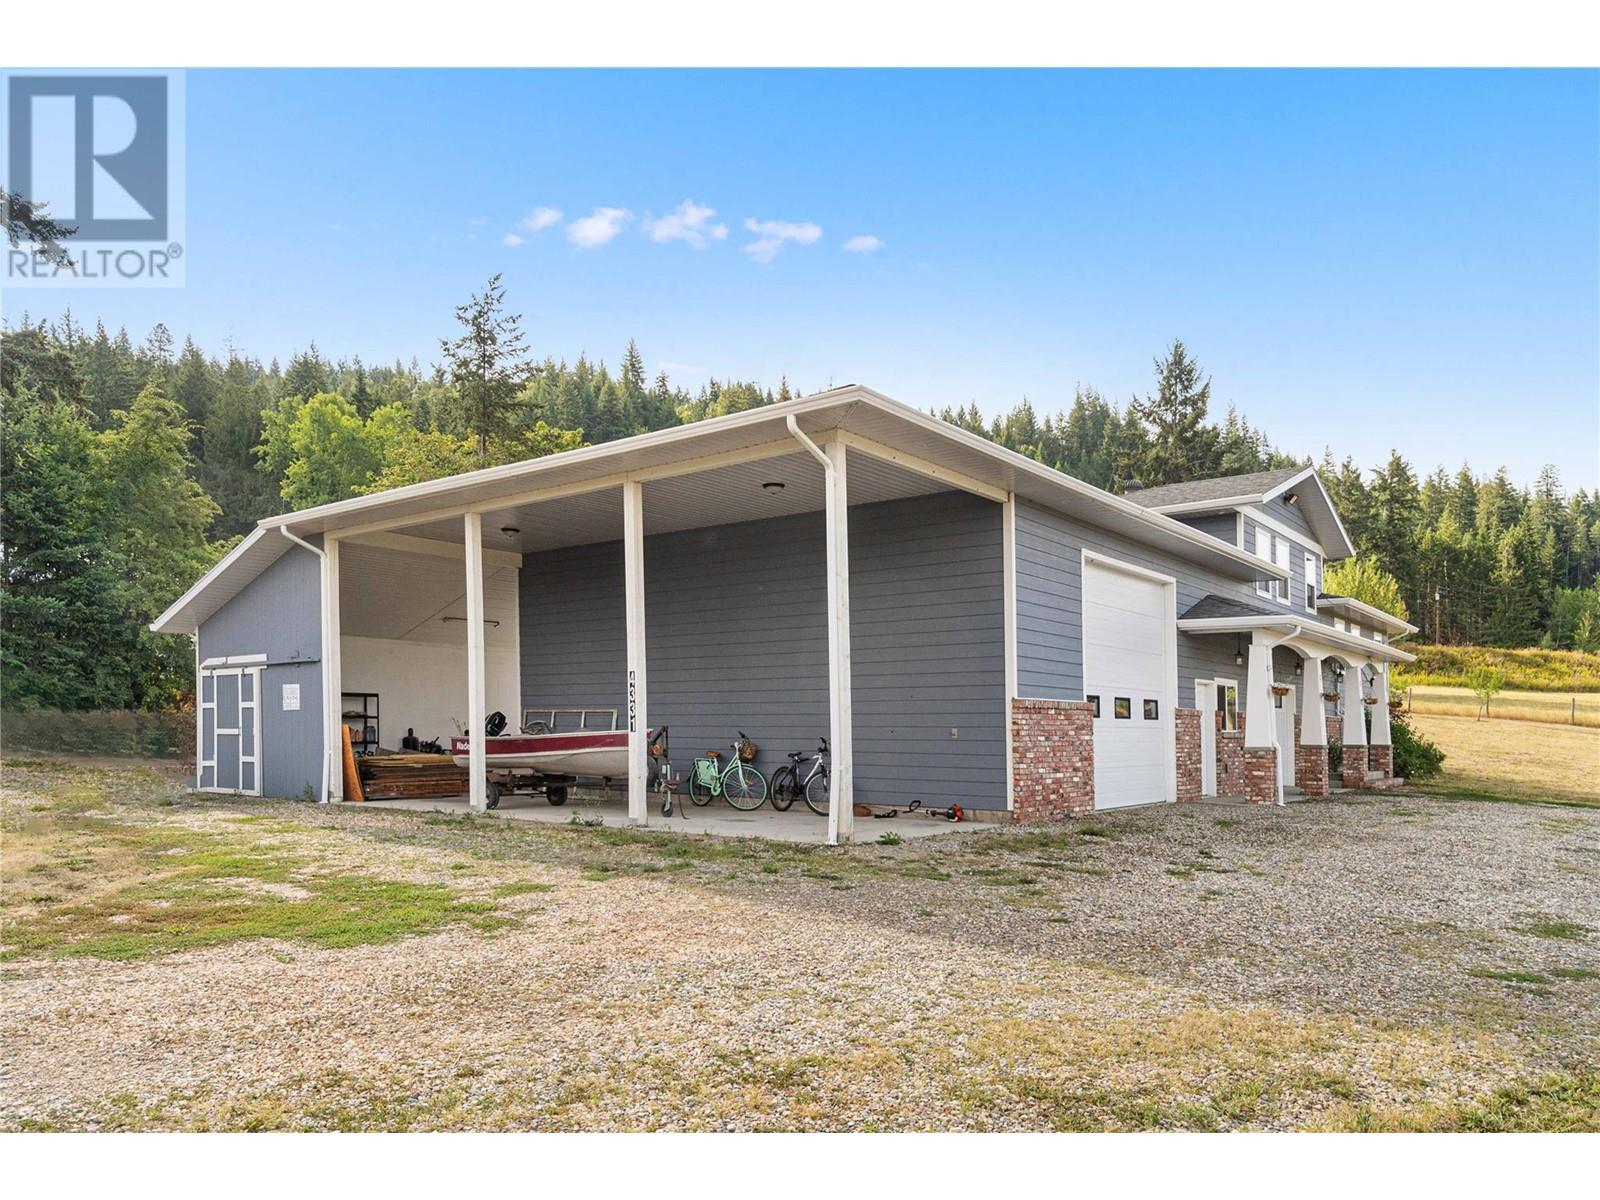  4331 Trans Canada Highway, Tappen